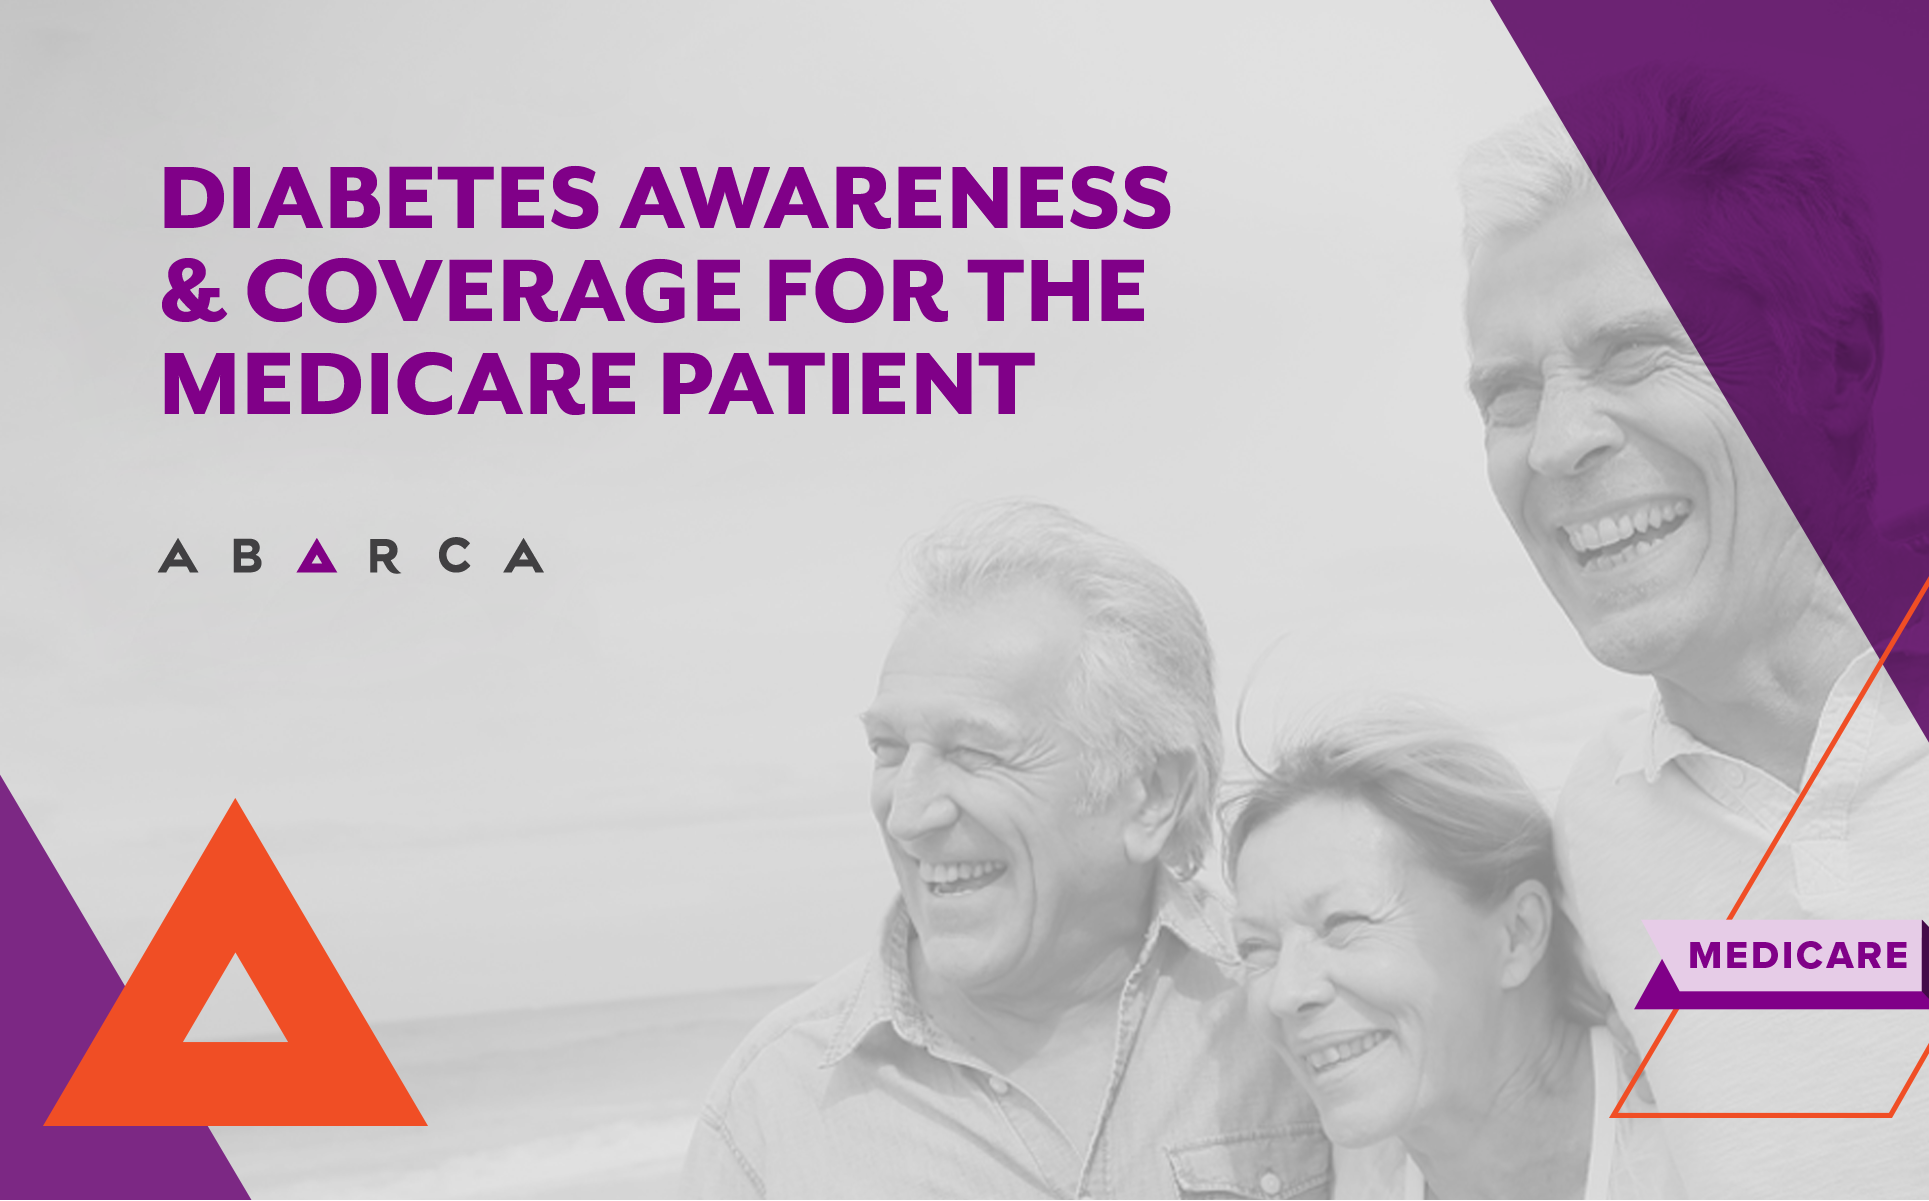 Abarca Health: Diabetes prevention tips & resources for the Medicare patient